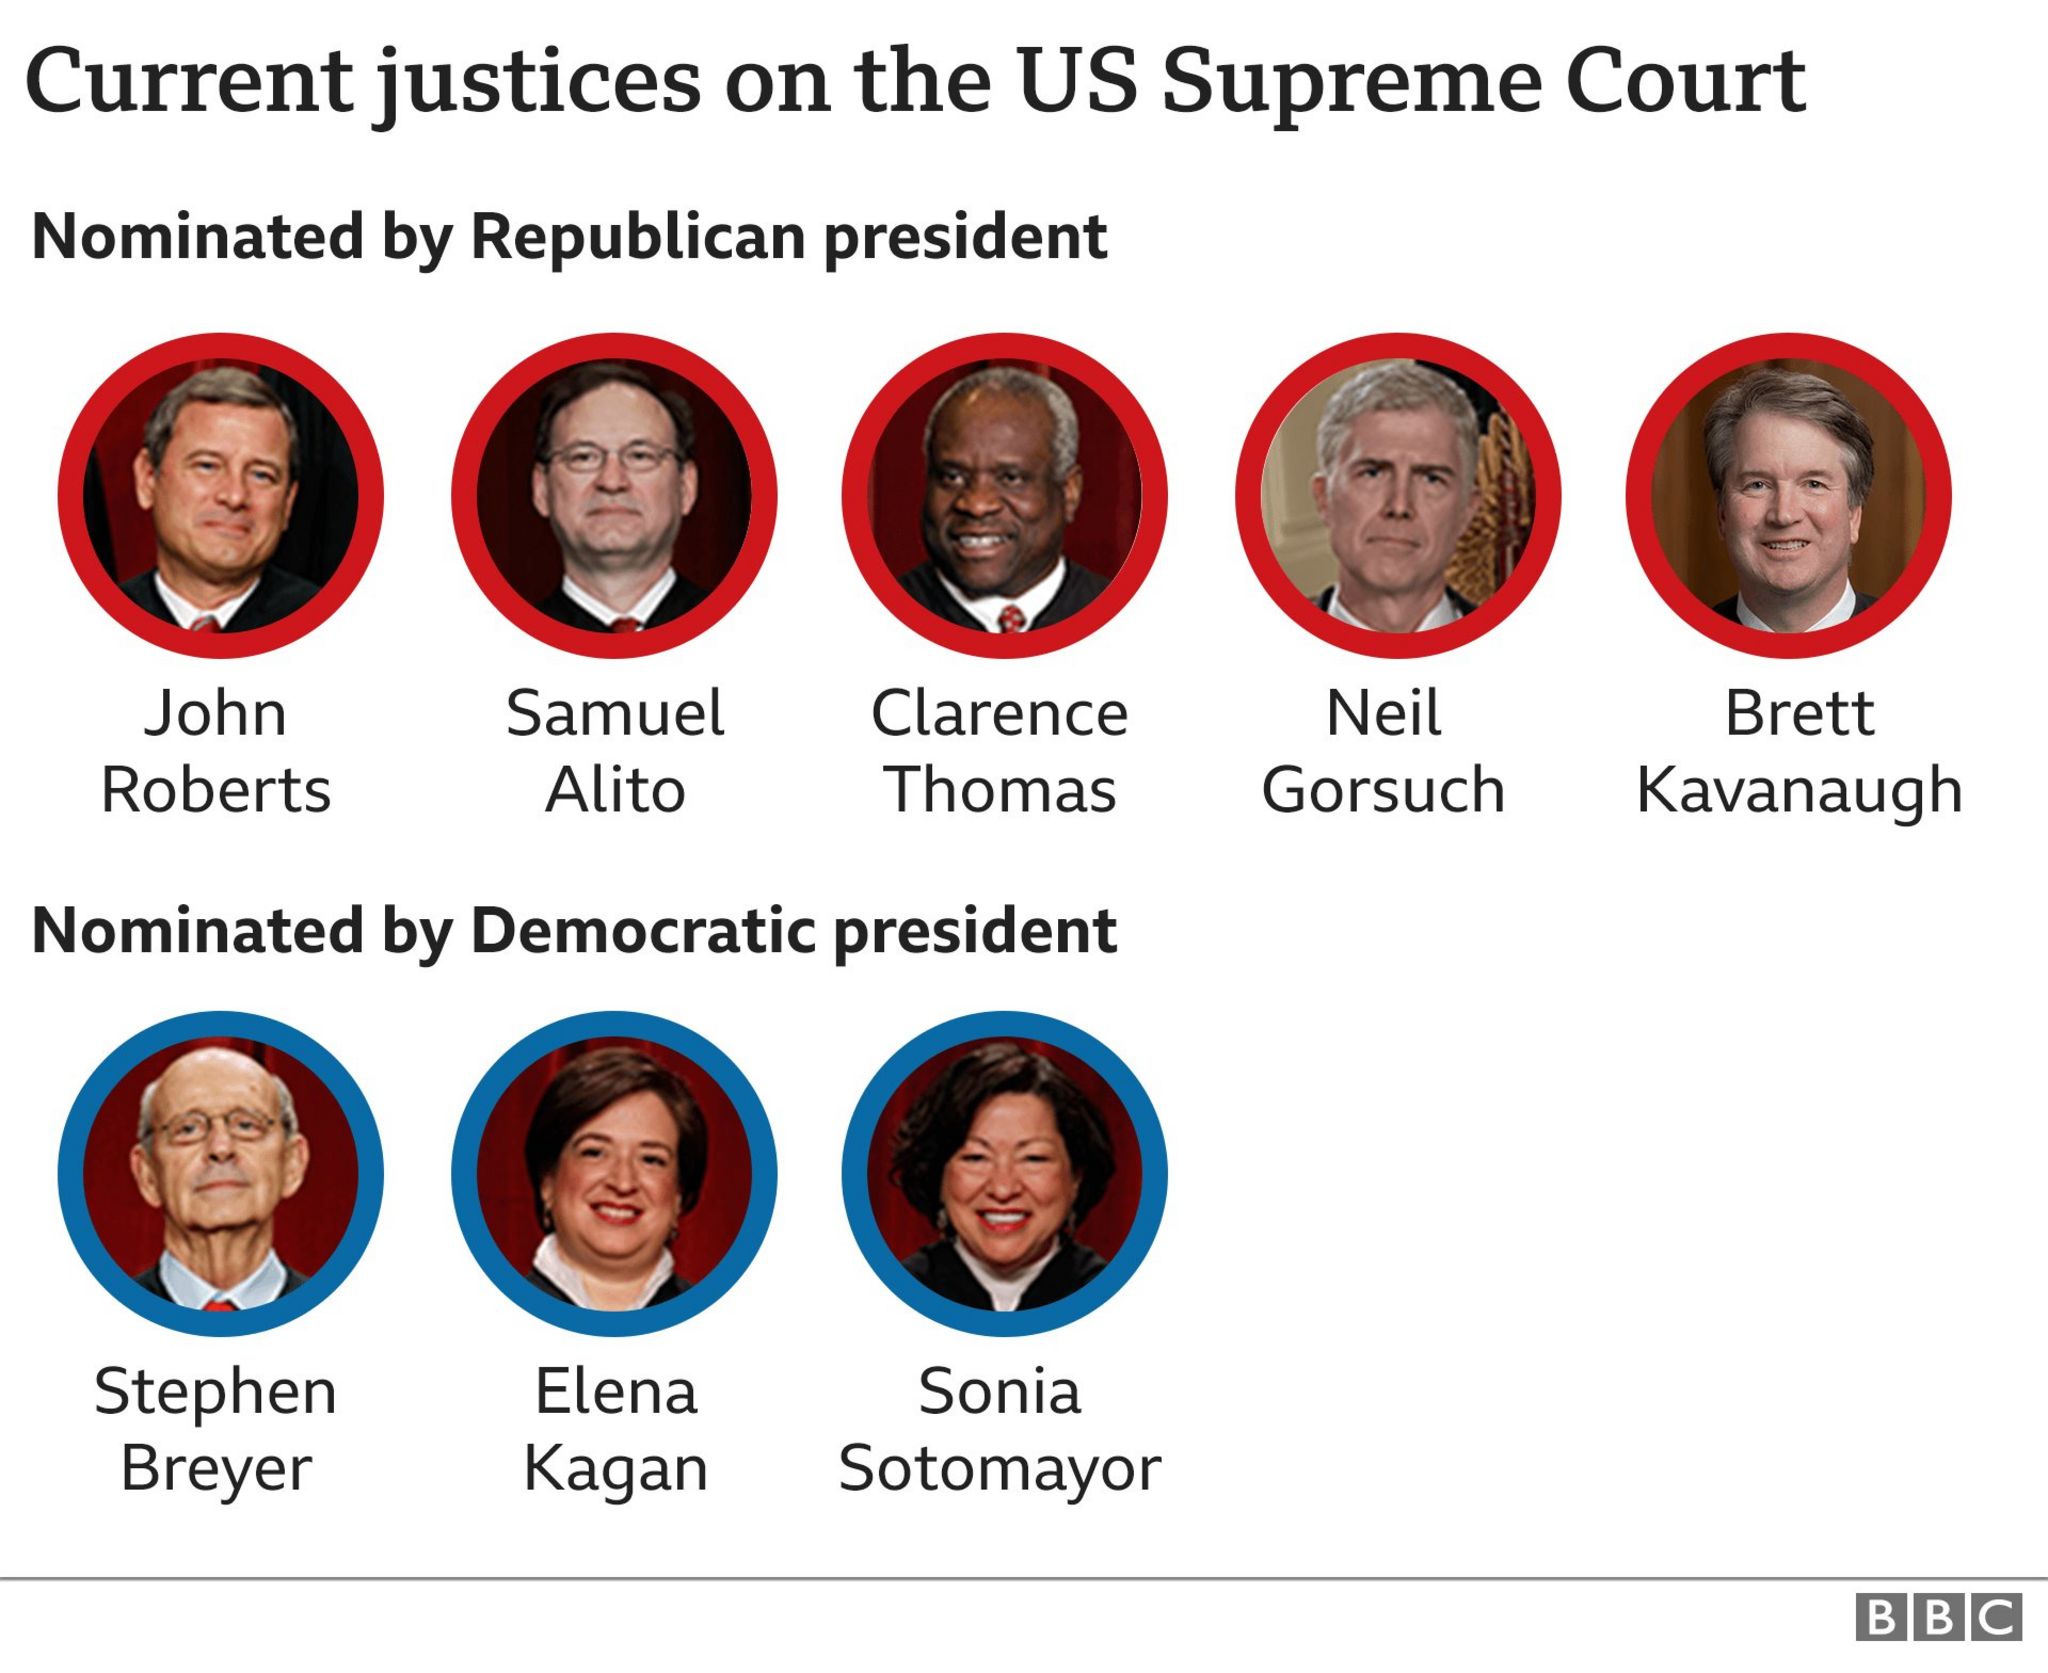 A graph showing the current justices